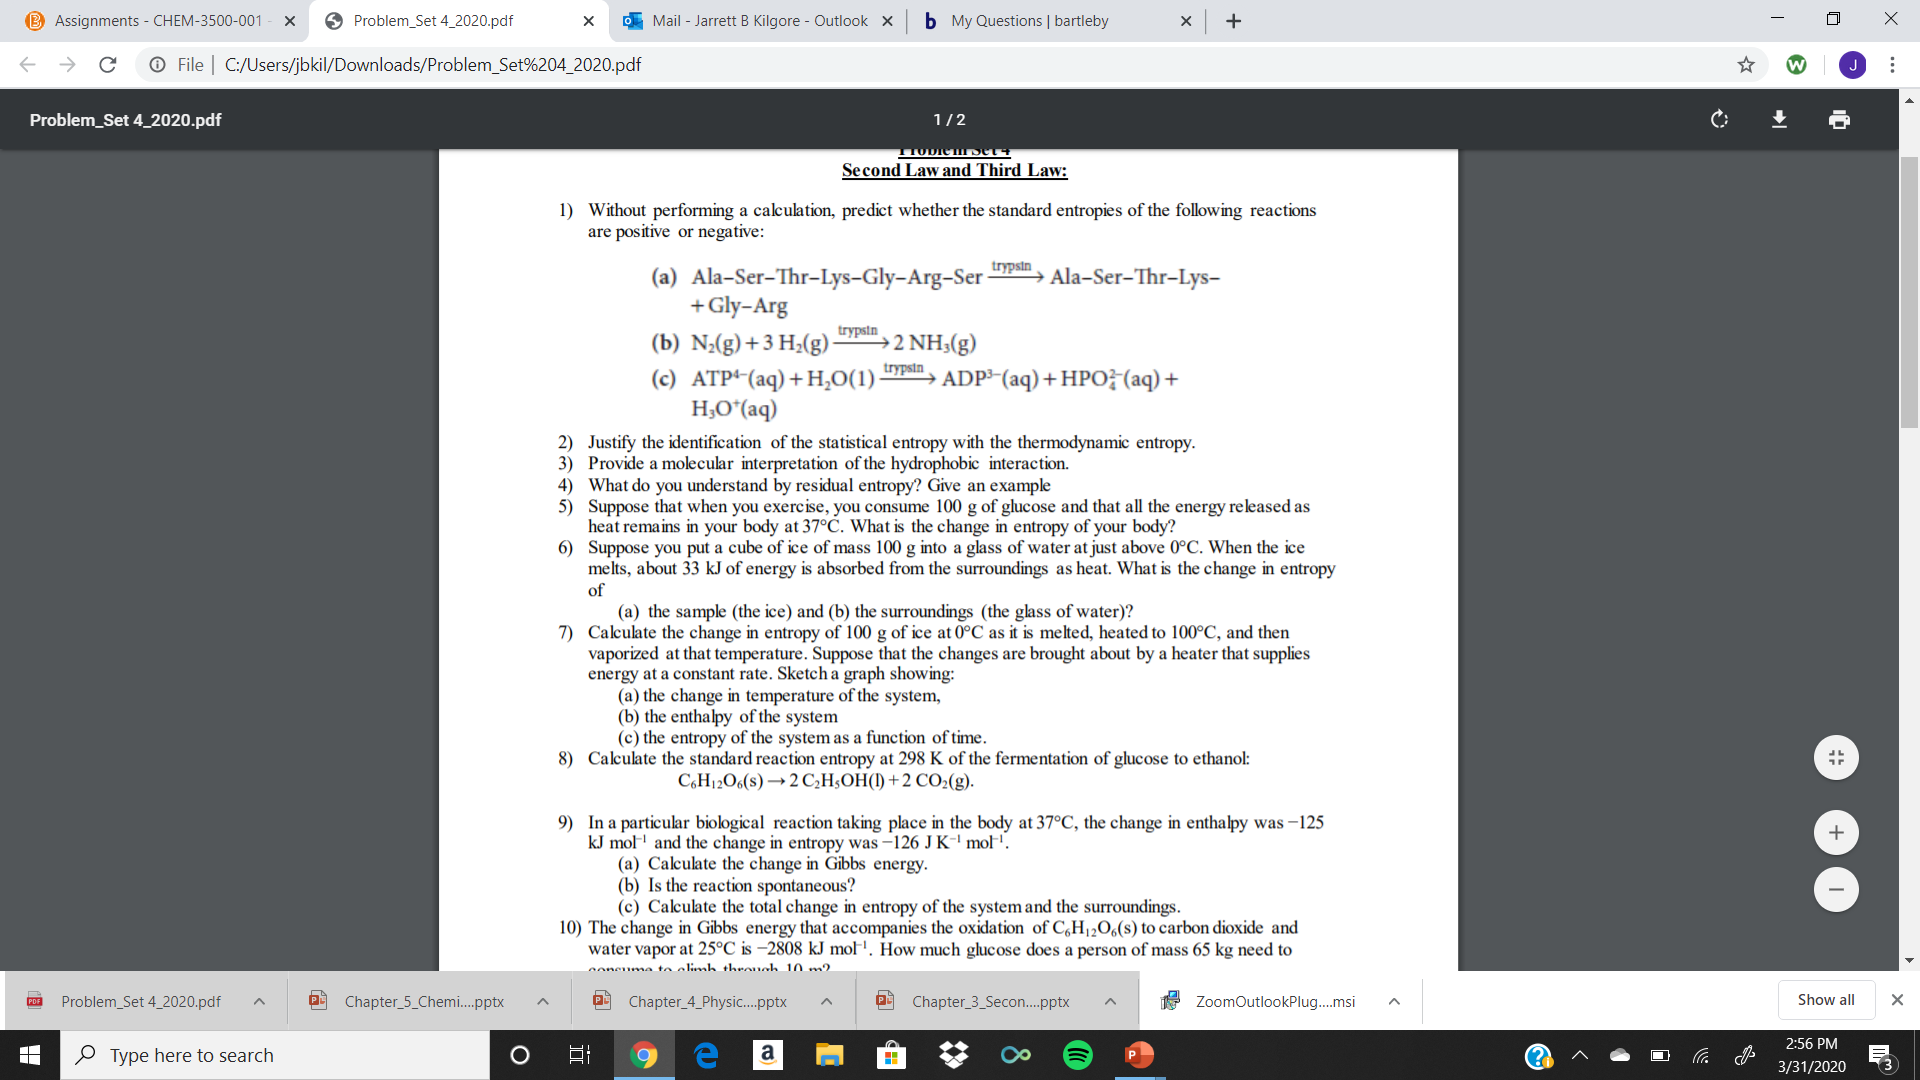 B Assignments - CHEM-3500-001
O Problem_Set 4_2020.pdf
O Mail - Jarrett B Kilgore - Outlook X
b My Questions | bartleby
O File | C:/Users/jbkil/Downloads/Problem_Set%204_2020.pdf
Problem_Set 4_2020.pdf
1/2
тODIешрeоч
Second Law and Third Law:
1) Without performing a calculation, predict whether the standard entropies of the following reactions
are positive or negative:
trypsin
(a) Ala-Ser-Thr-Lys-Gly-Arg-Ser
+Gly-Arg
Ala-Ser-Thr-Lys-
trypsin
(b) N;(g)+3 H;(g)
(c) ATP+(aq)+H,0(1):
H;O*(aq)
2 NH3(g)
trypsin
ADP³-(aq) +HPOF(aq) +
2) Justify the identification of the statistical entropy with the thermodynamic entropy.
3) Provide a molecular interpretation of the hydrophobic interaction.
4) What do you understand by residual entropy? Give an example
5) Suppose that when you exercise, you consume 100 g of glucose and that all the energy released as
heat remains in your body at 37°C. What is the change in entropy of your body?
6) Suppose you put a cube of ice of mass 100 g into a glass of water at just above 0°C. When the ice
melts, about 33 kJ of energy is absorbed from the surroundings as heat. What is the change in entropy
of
(a) the sample (the ice) and (b) the surroundings (the glass of water)?
7) Calculate the change in entropy of 100 g of ice at 0°C as it is melted, heated to 100°C, and then
vaporized at that temperature. Suppose that the changes are brought about by a heater that supplies
energy at a constant rate. Sketch a graph showing:
(a) the change in temperature of the system,
(b) the enthalpy of the system
(c) the entropy of the system as a function of time.
8) Calculate the standard reaction entropy at 298 K of the fermentation of glucose to ethanol:
C,H12O6(s) →2 C,H;OH(1) +2 CO2(g).
9) In a particular biological reaction taking place in the body at 37°C, the change in enthalpy was -125
kJ mol' and the change in entropy was –126 J K" mol'.
(a) Calculate the change in Gibbs energy.
(b) Is the reaction spontaneous?
(c) Calculate the total change in entropy of the system and the surroundings.
10) The change in Gibbs energy that accompanies the oxidation of C,H12O6(s) to carbon dioxide and
water vapor at 25°C is –2808 kJ mol'. How much glucose does a person of mass 65 kg need to
noncuma to olimb throuch 10 m2
Problem_Set 4_2020.pdf
Chapter_5_Chemi.pptx
Chapter_4_Physic..pptx
Chapter_3_Secon.pptx
ZoomOutlookPlug.msi
Show all
2:56 PM
O Type here to search
3/31/2020
(3
...
